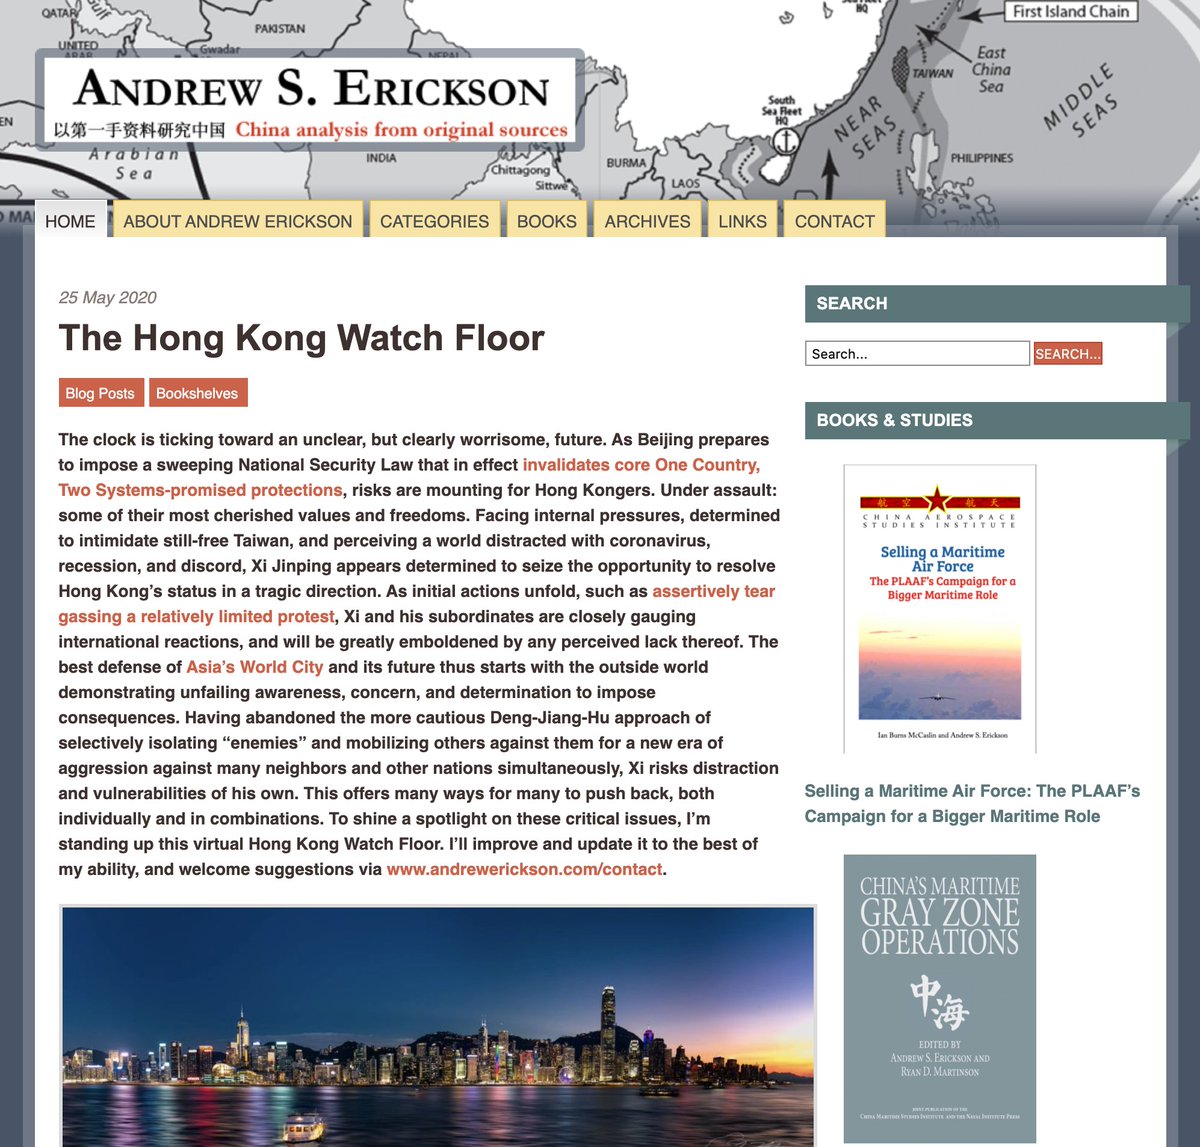 Now, to help stand the watch for  #HongKong, I've compiled the following sources: http://www.andrewerickson.com/2020/05/the-hong-kong-watch-floor/Please feel free to suggest your own @WHNSC  @robertcobrien  @StateDept  @SecPompeo  @USAinHKMacau  @icablenews  @inmediahk  @InmediaHK_EN  @StandNewsHK  @eyepressnews  @HongKongFP